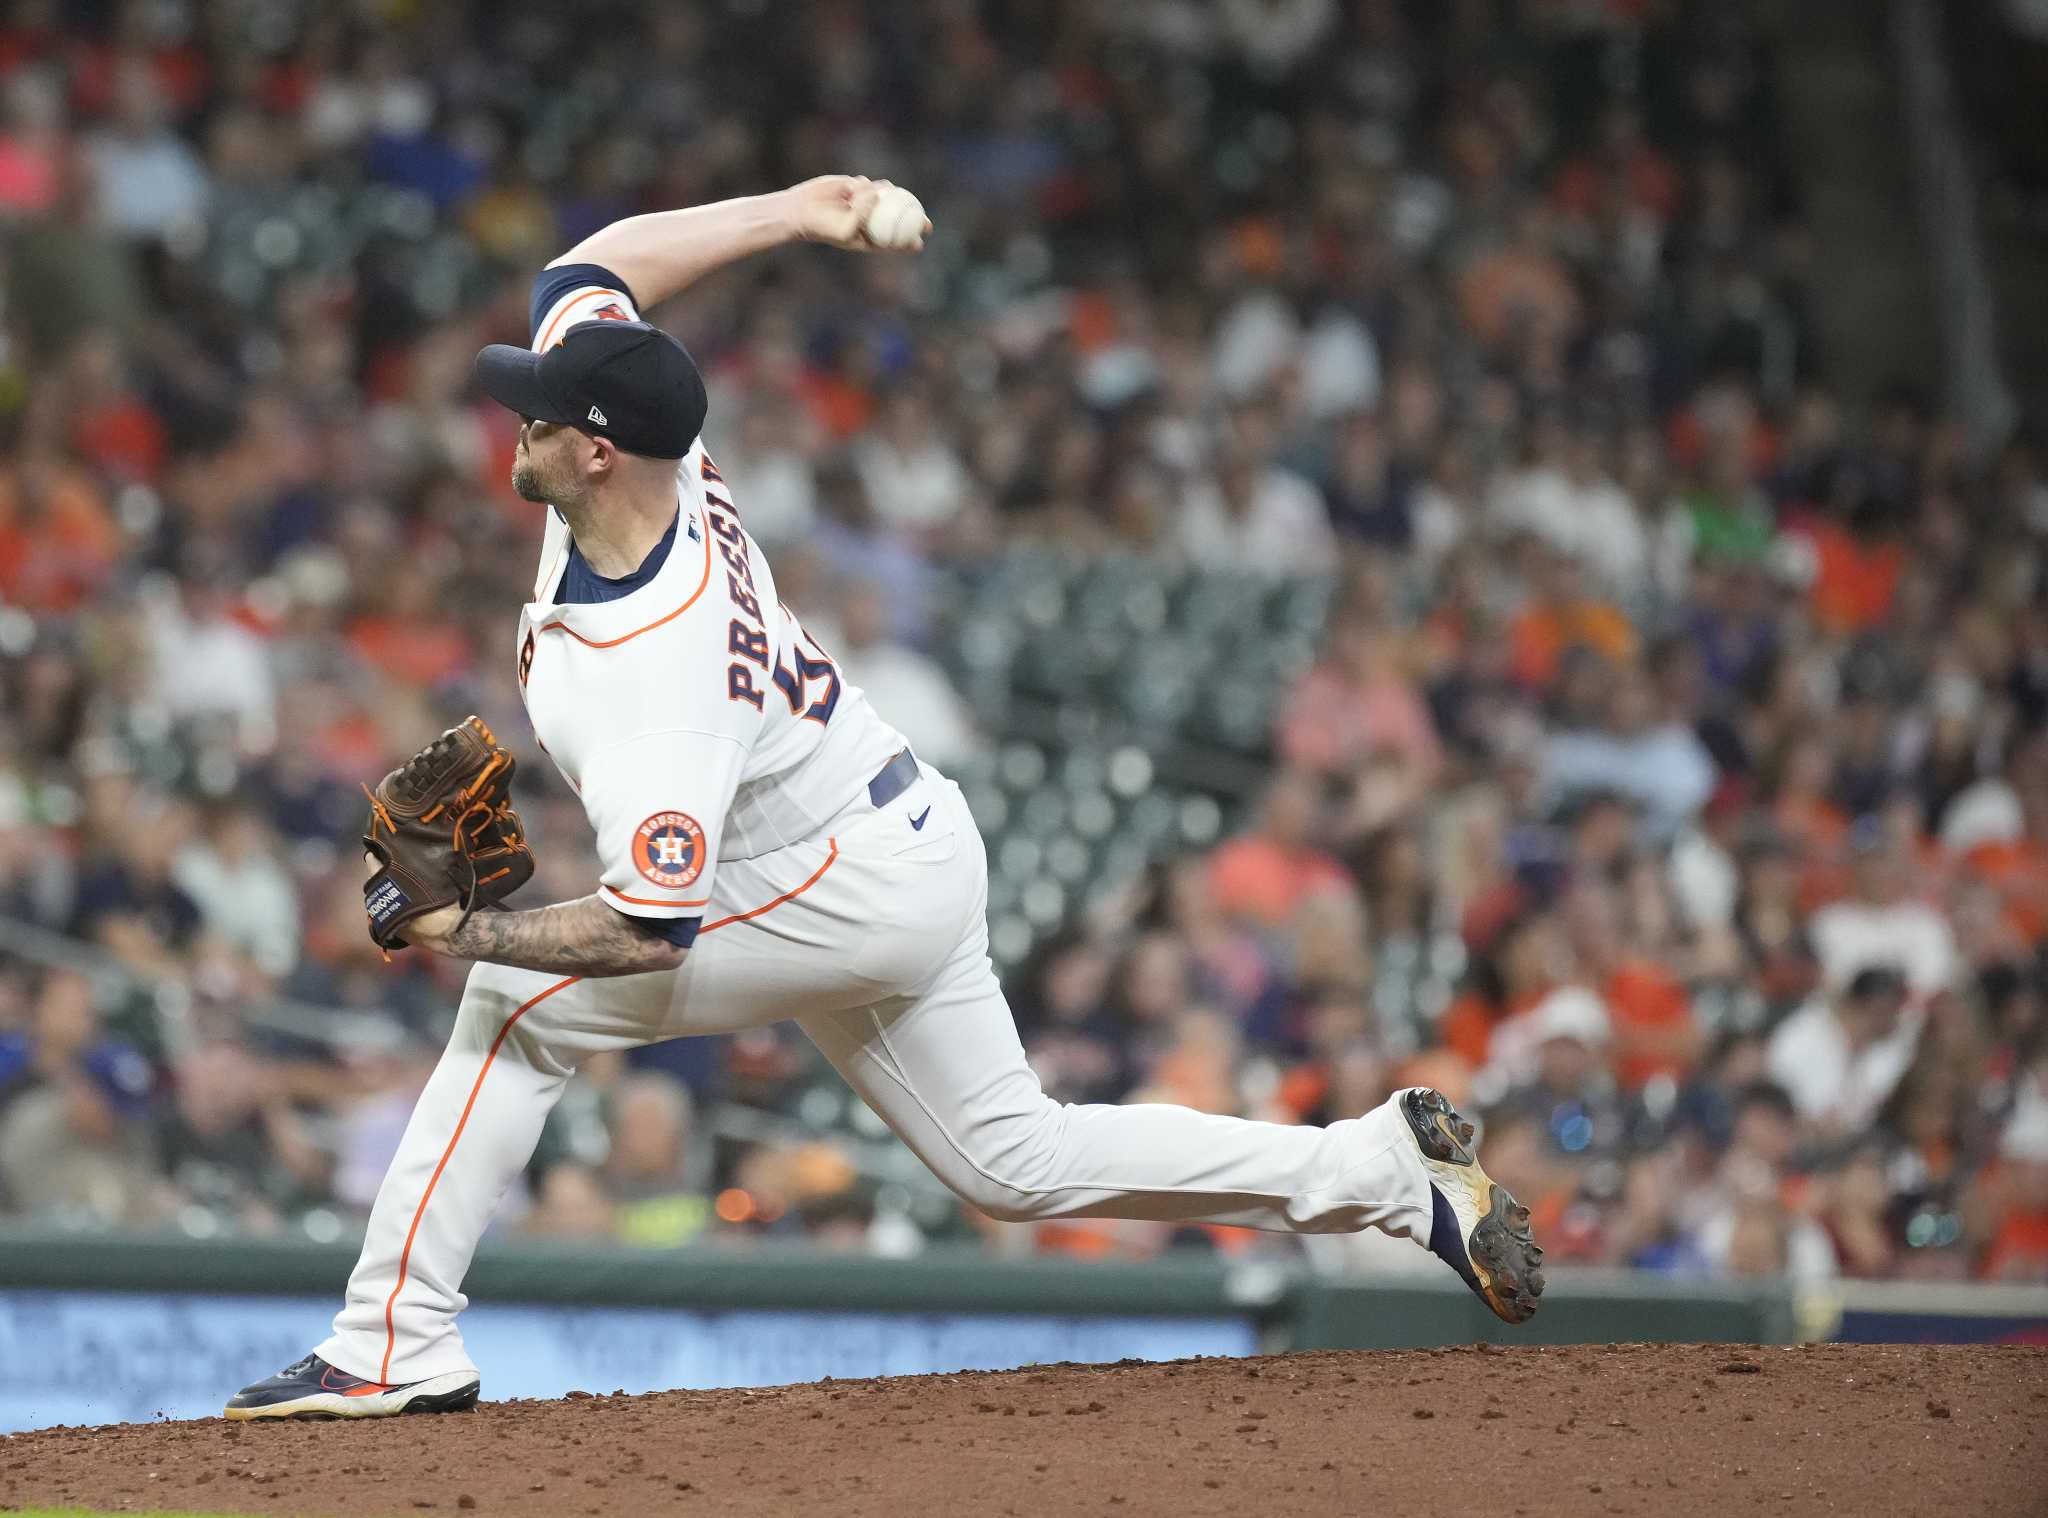 Murray] Reliever Ryan Pressly and the Houston Astros are in